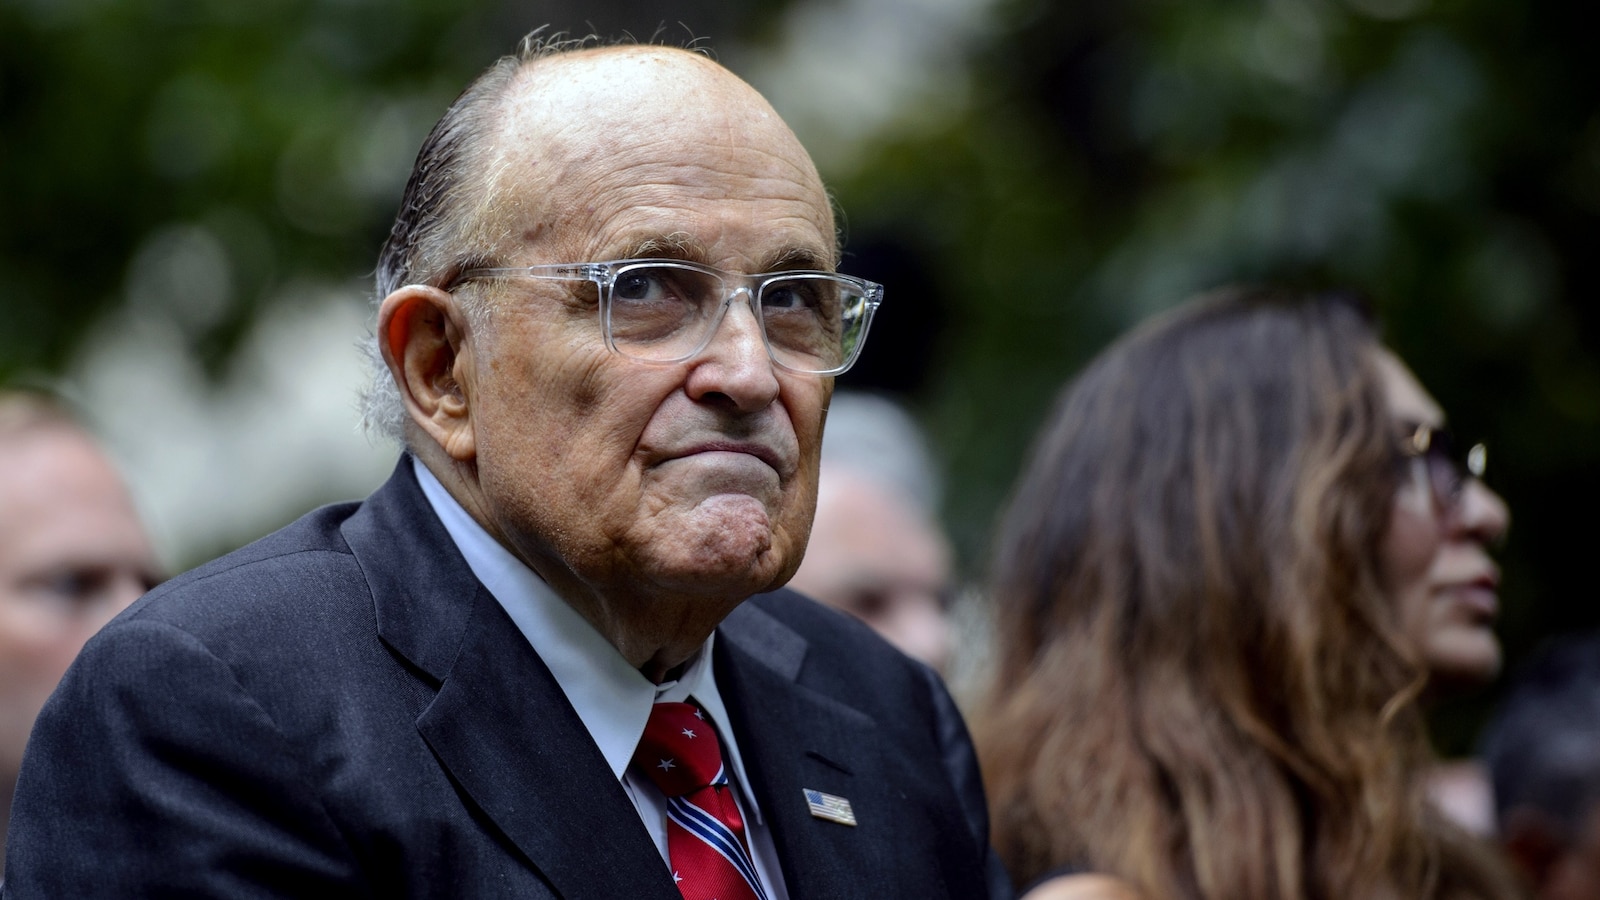 Rudy Giuliani disbarred over 'false and misleading' statements on 2020 election